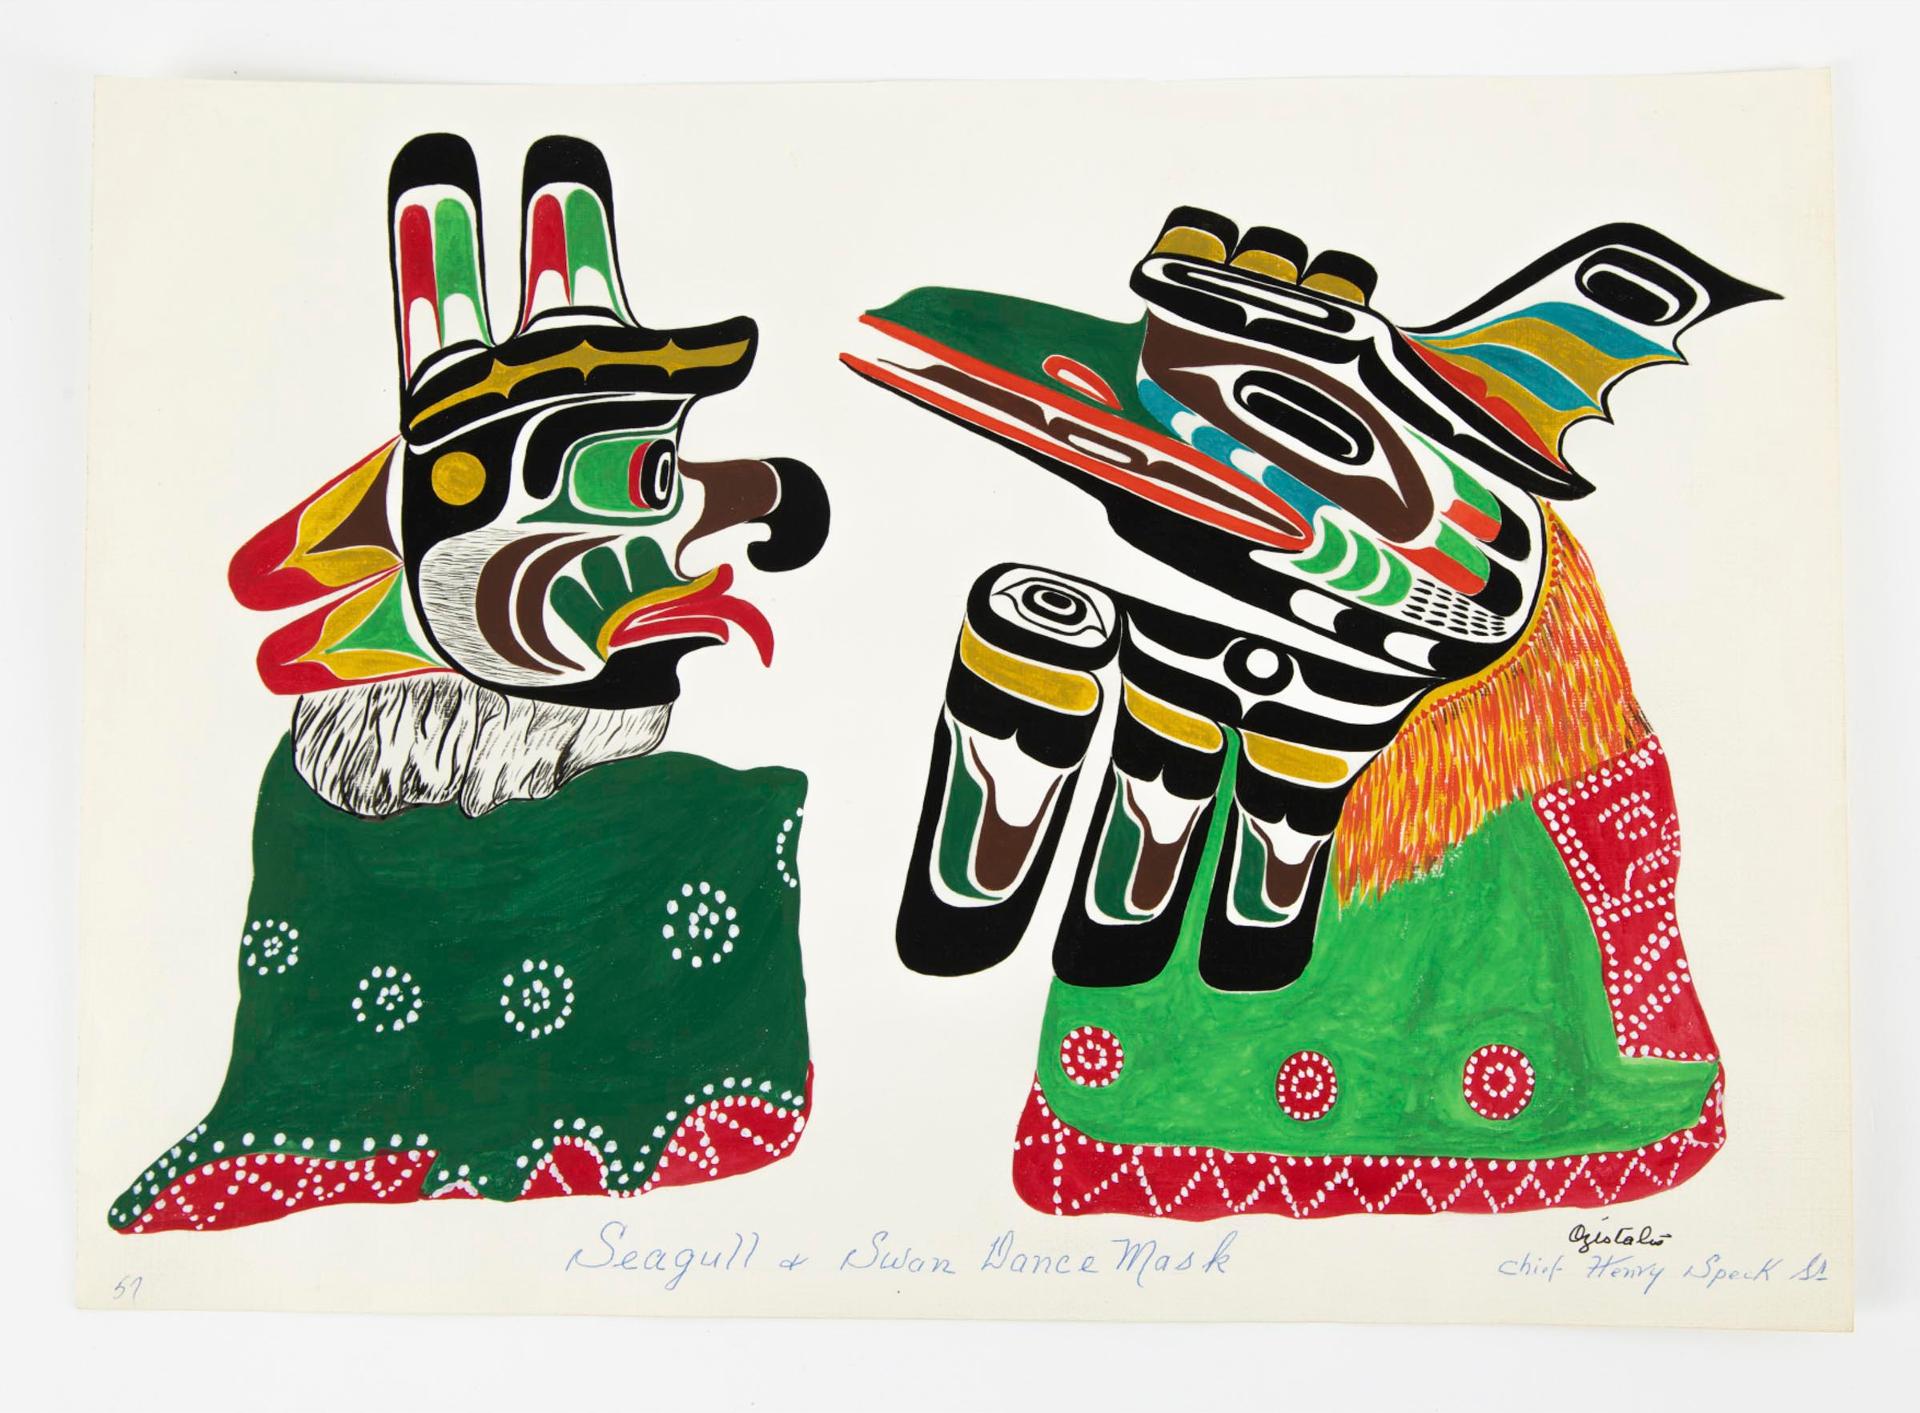 Chief Henry Speck (1908-1971) - Seagull & Swan Dance Mask